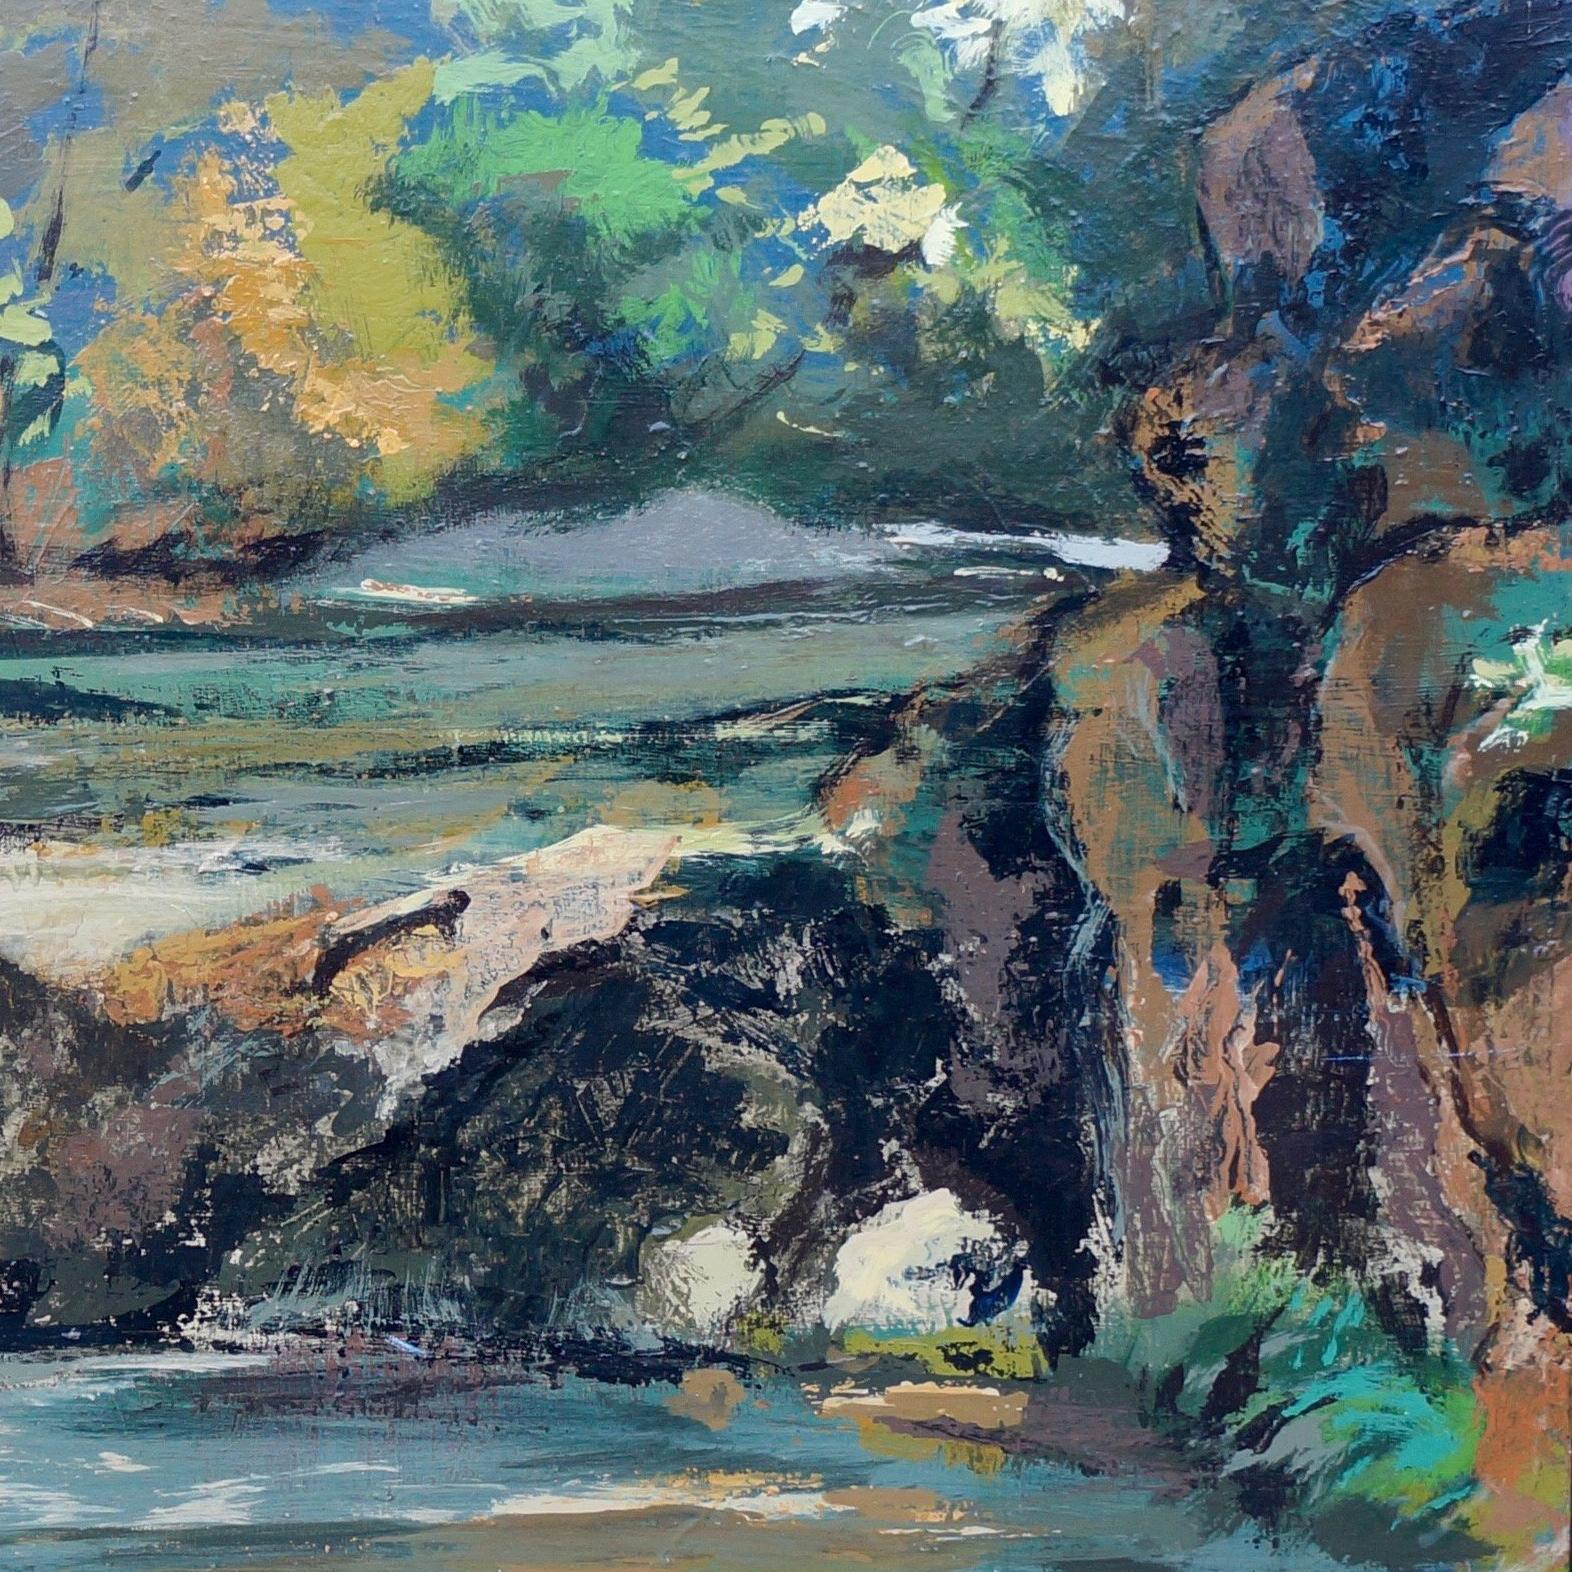 <p>Artist Comments<br />This painting depicts a favorite river in southern Oregon that fishermen like. I loved the light shining on the river and in the foliage of the trees.</p><br /><p>About the Artist<br />English artist Sidonie Caron lives in